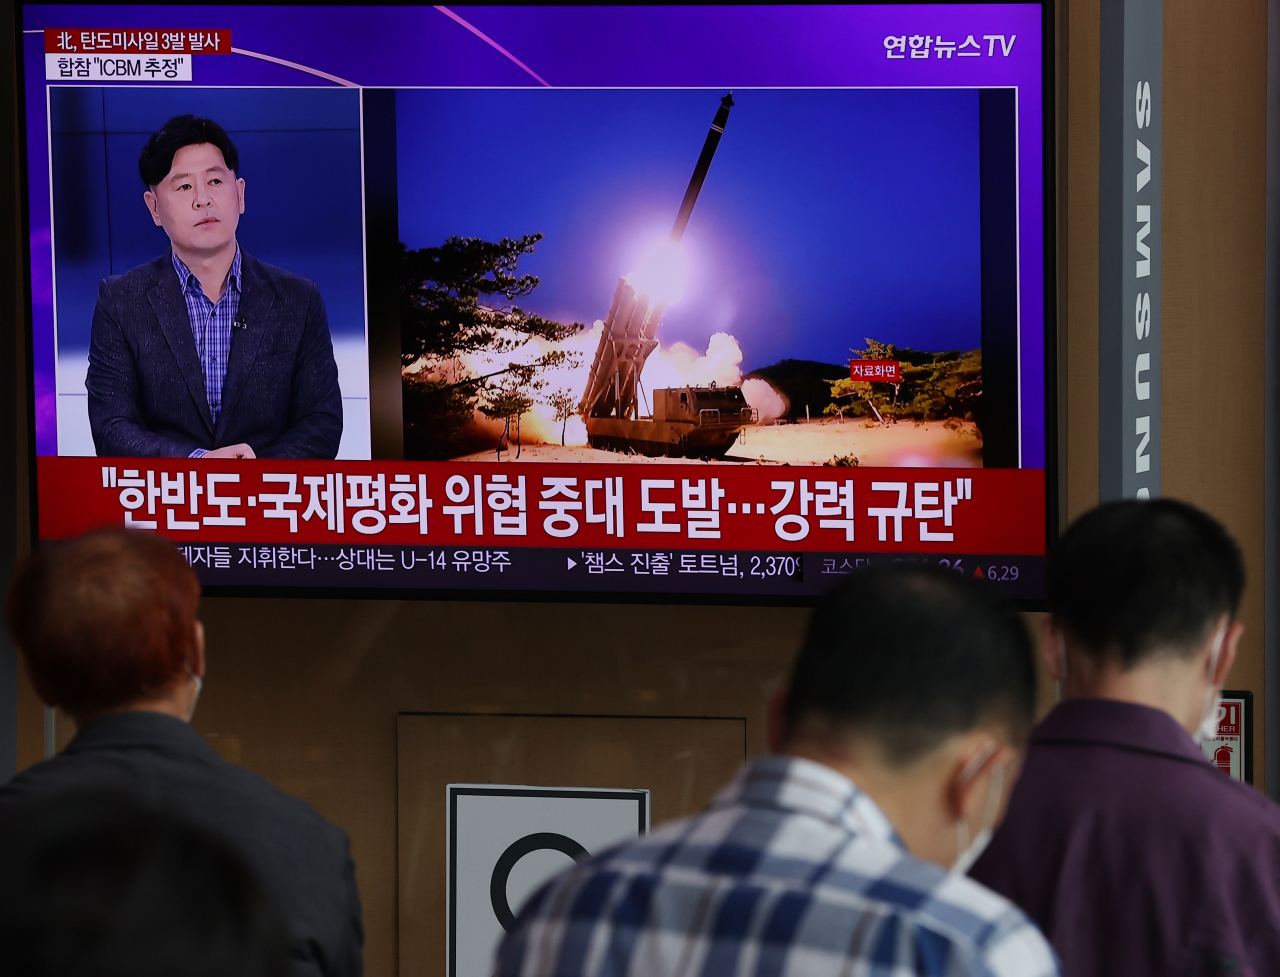 This photo, taken Wednesday, shows a news report on a North Korean missile launch being aired on a TV screen at Seoul Station in Seoul. (Yonhap)